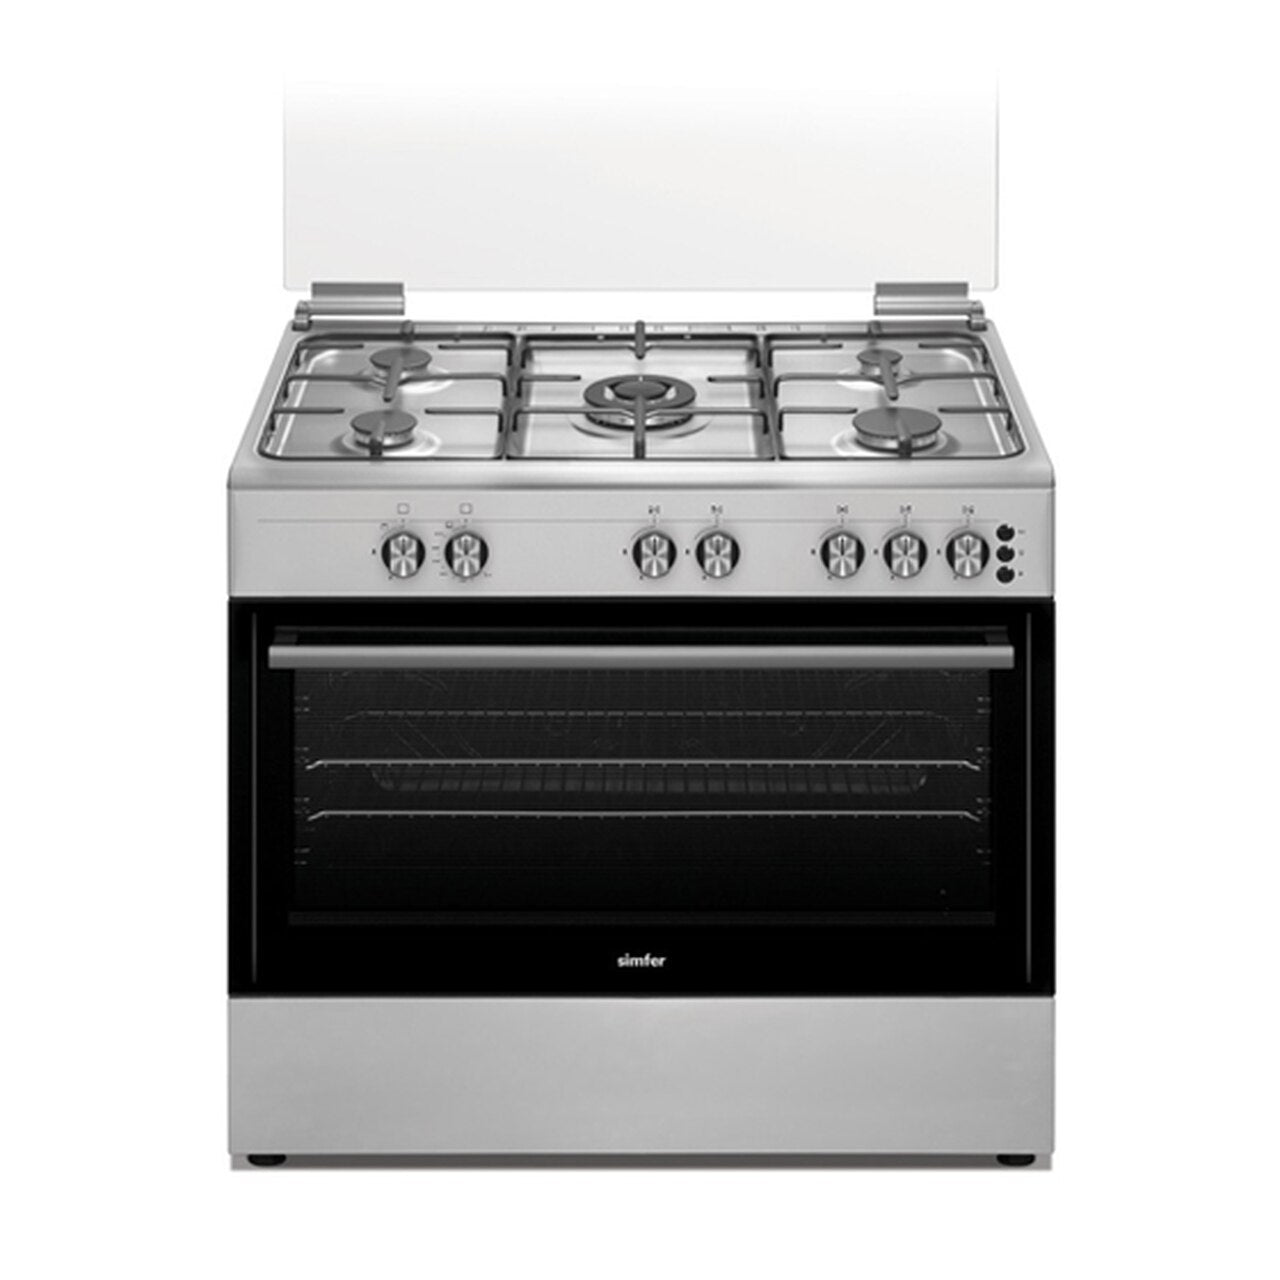 SIMFER Free Standing Gas Cooker 90CM 5 Burners Cast Iron Full Safety - Stainless Steel